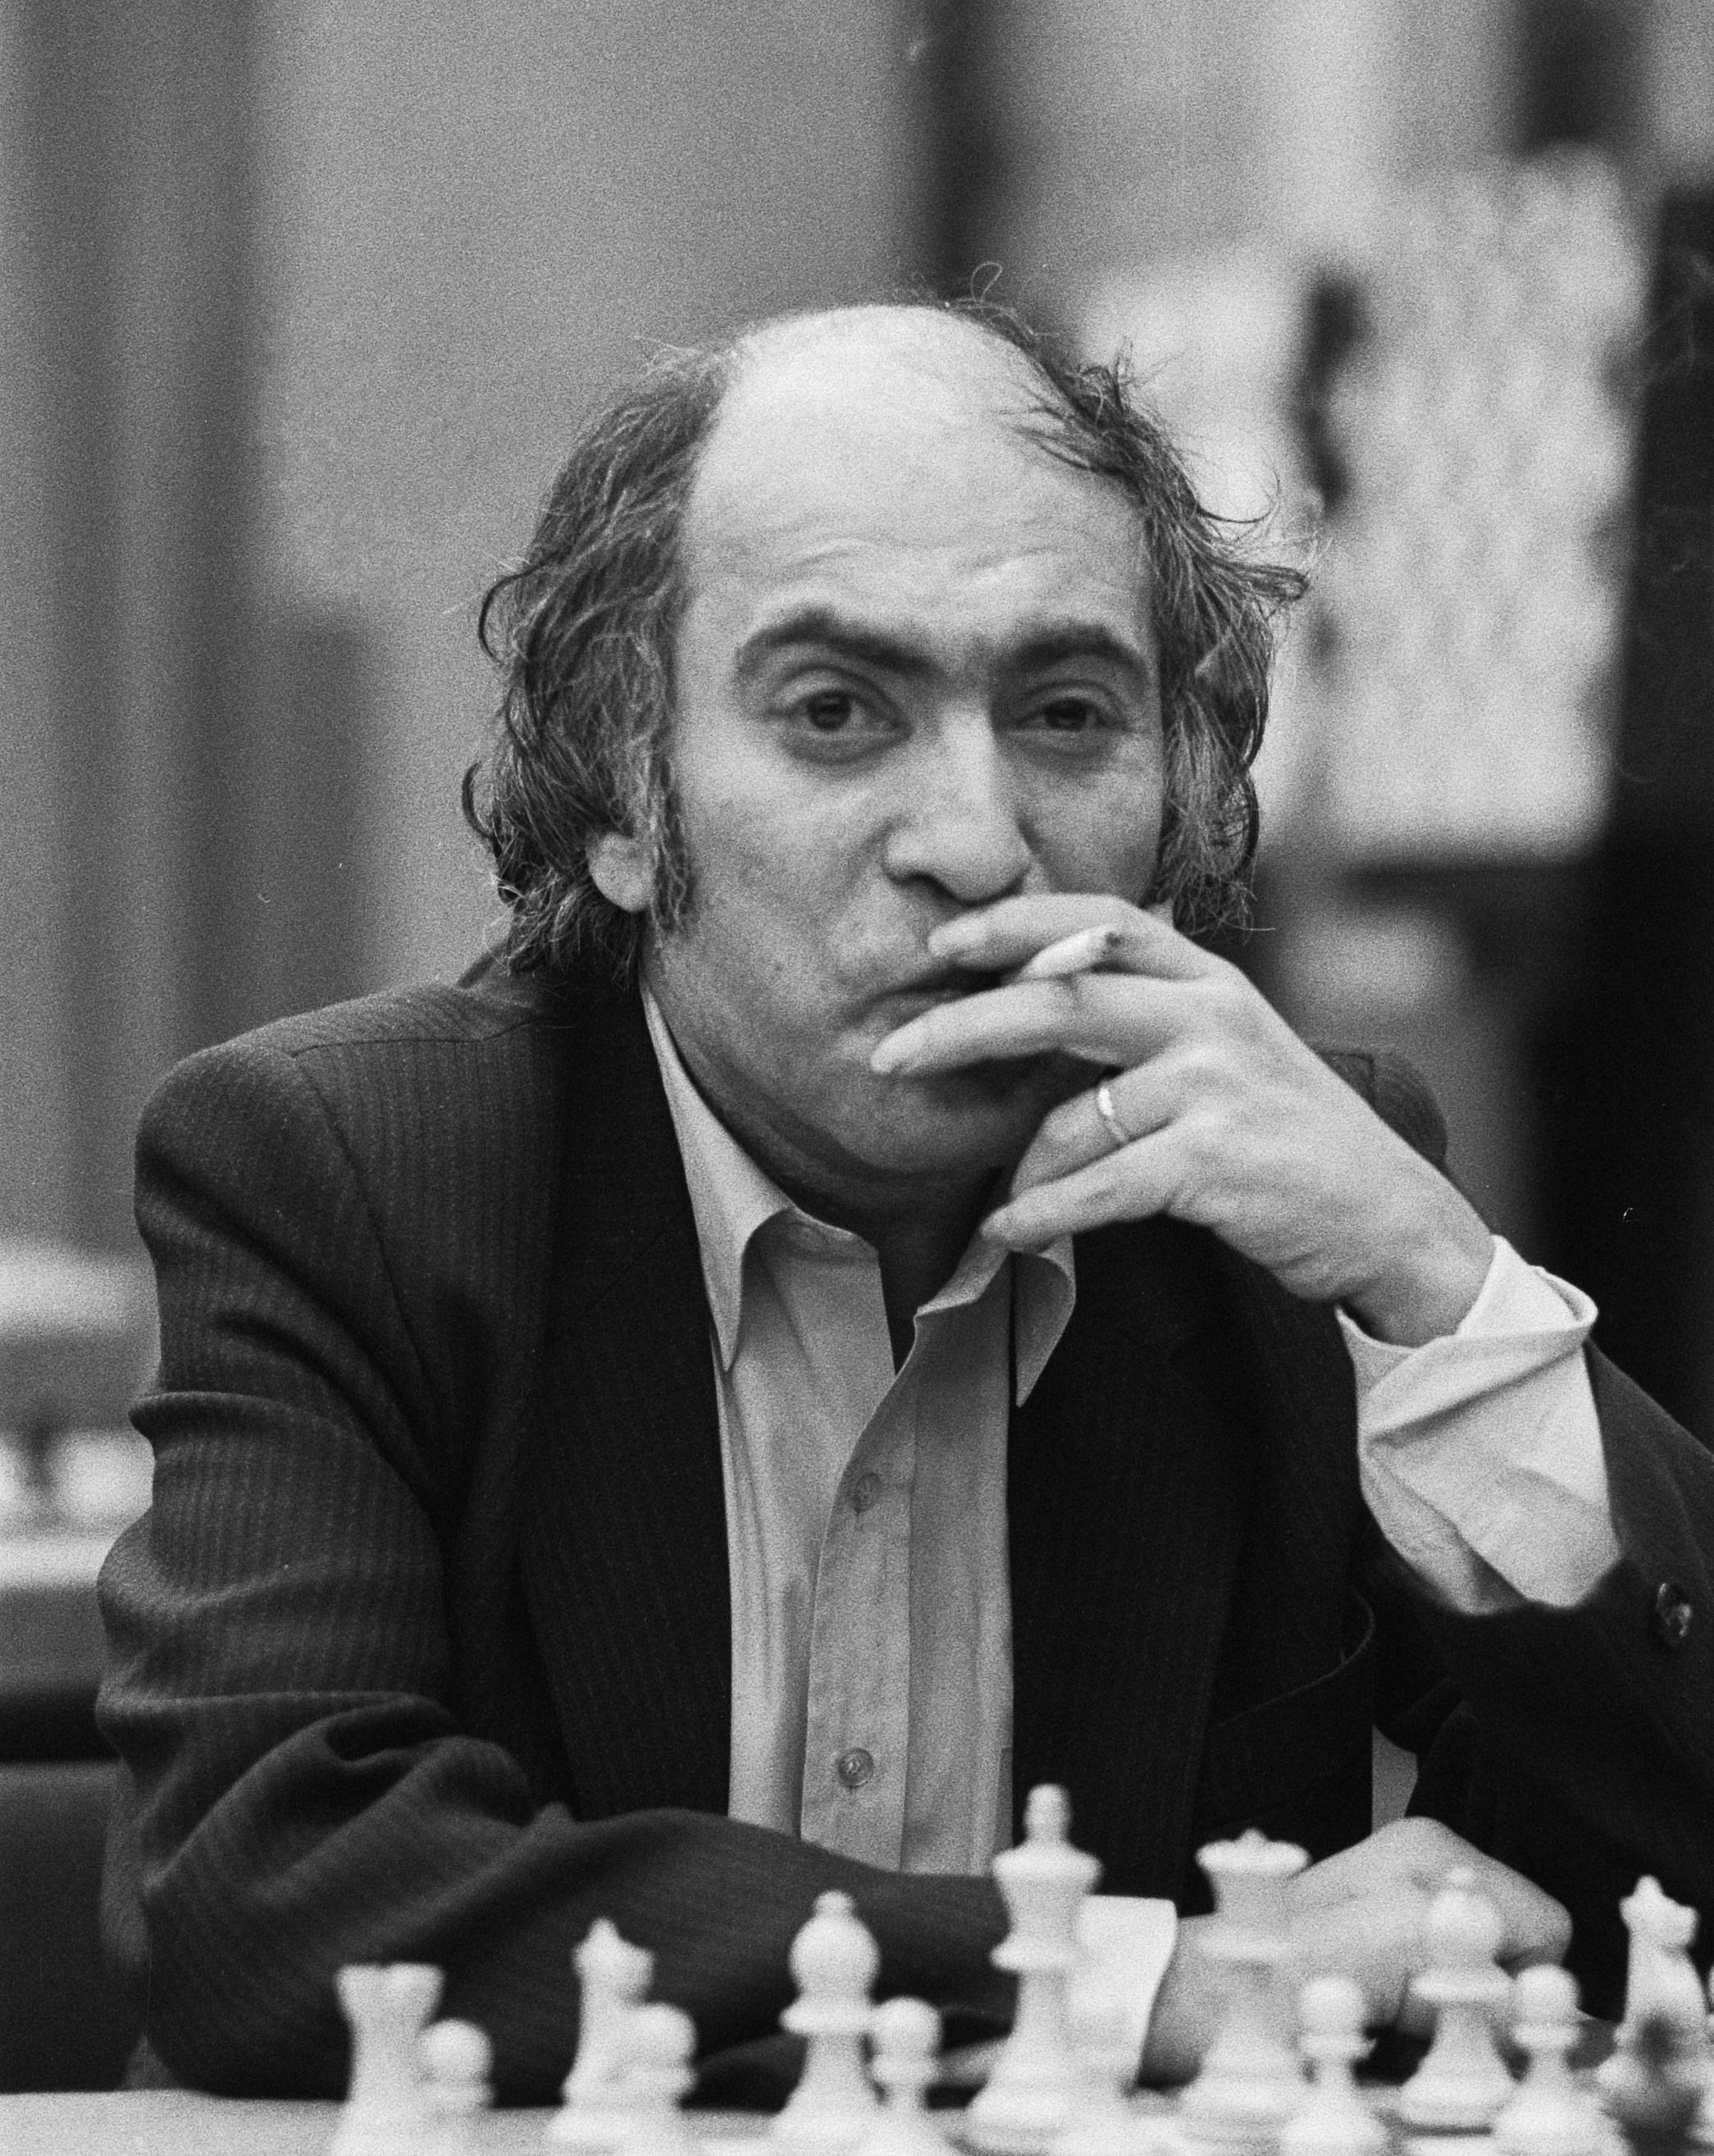 Attack With Mikhail Tal